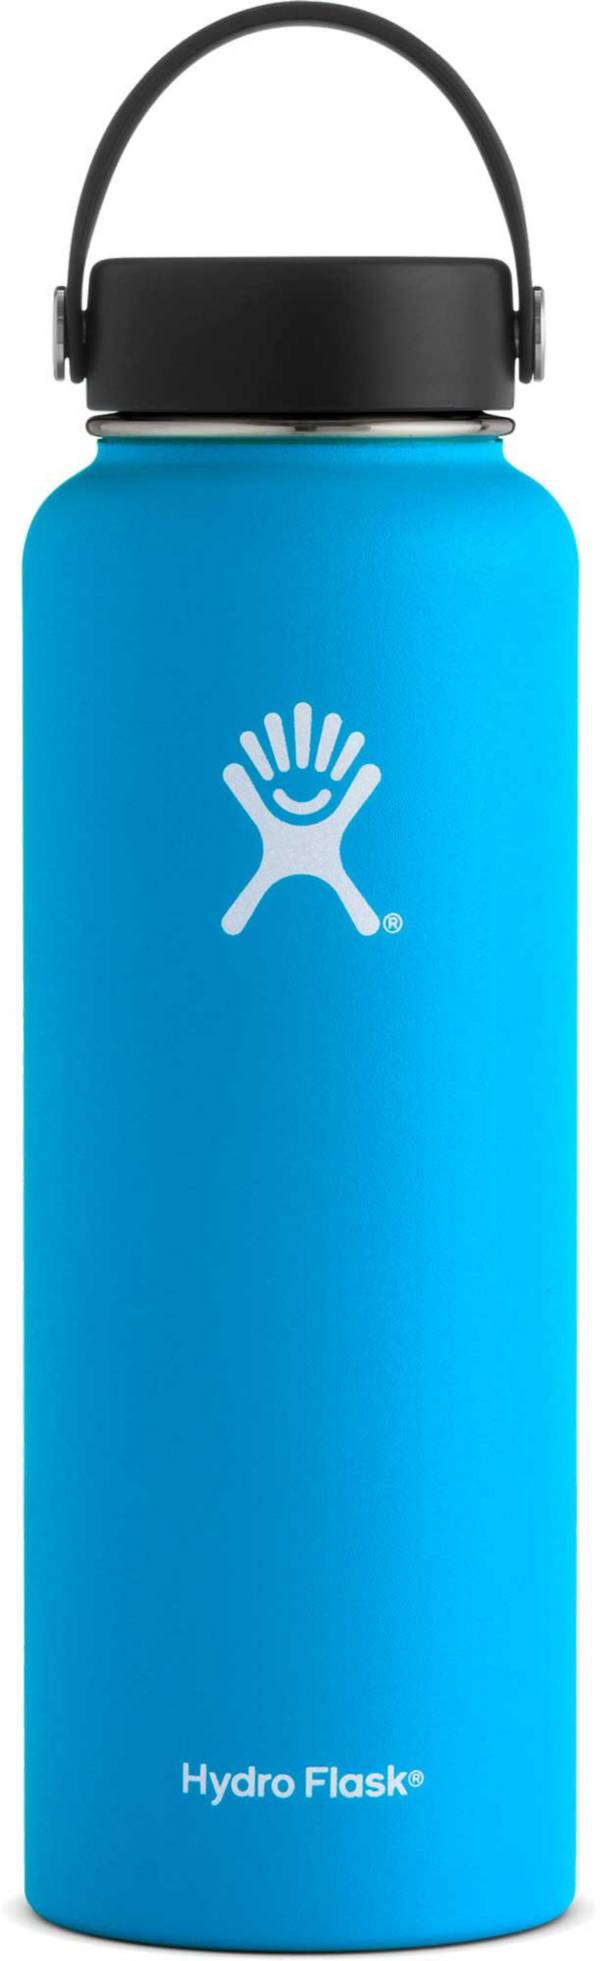 Hydro Flask Wide Mouth 40 oz. Bottle product image